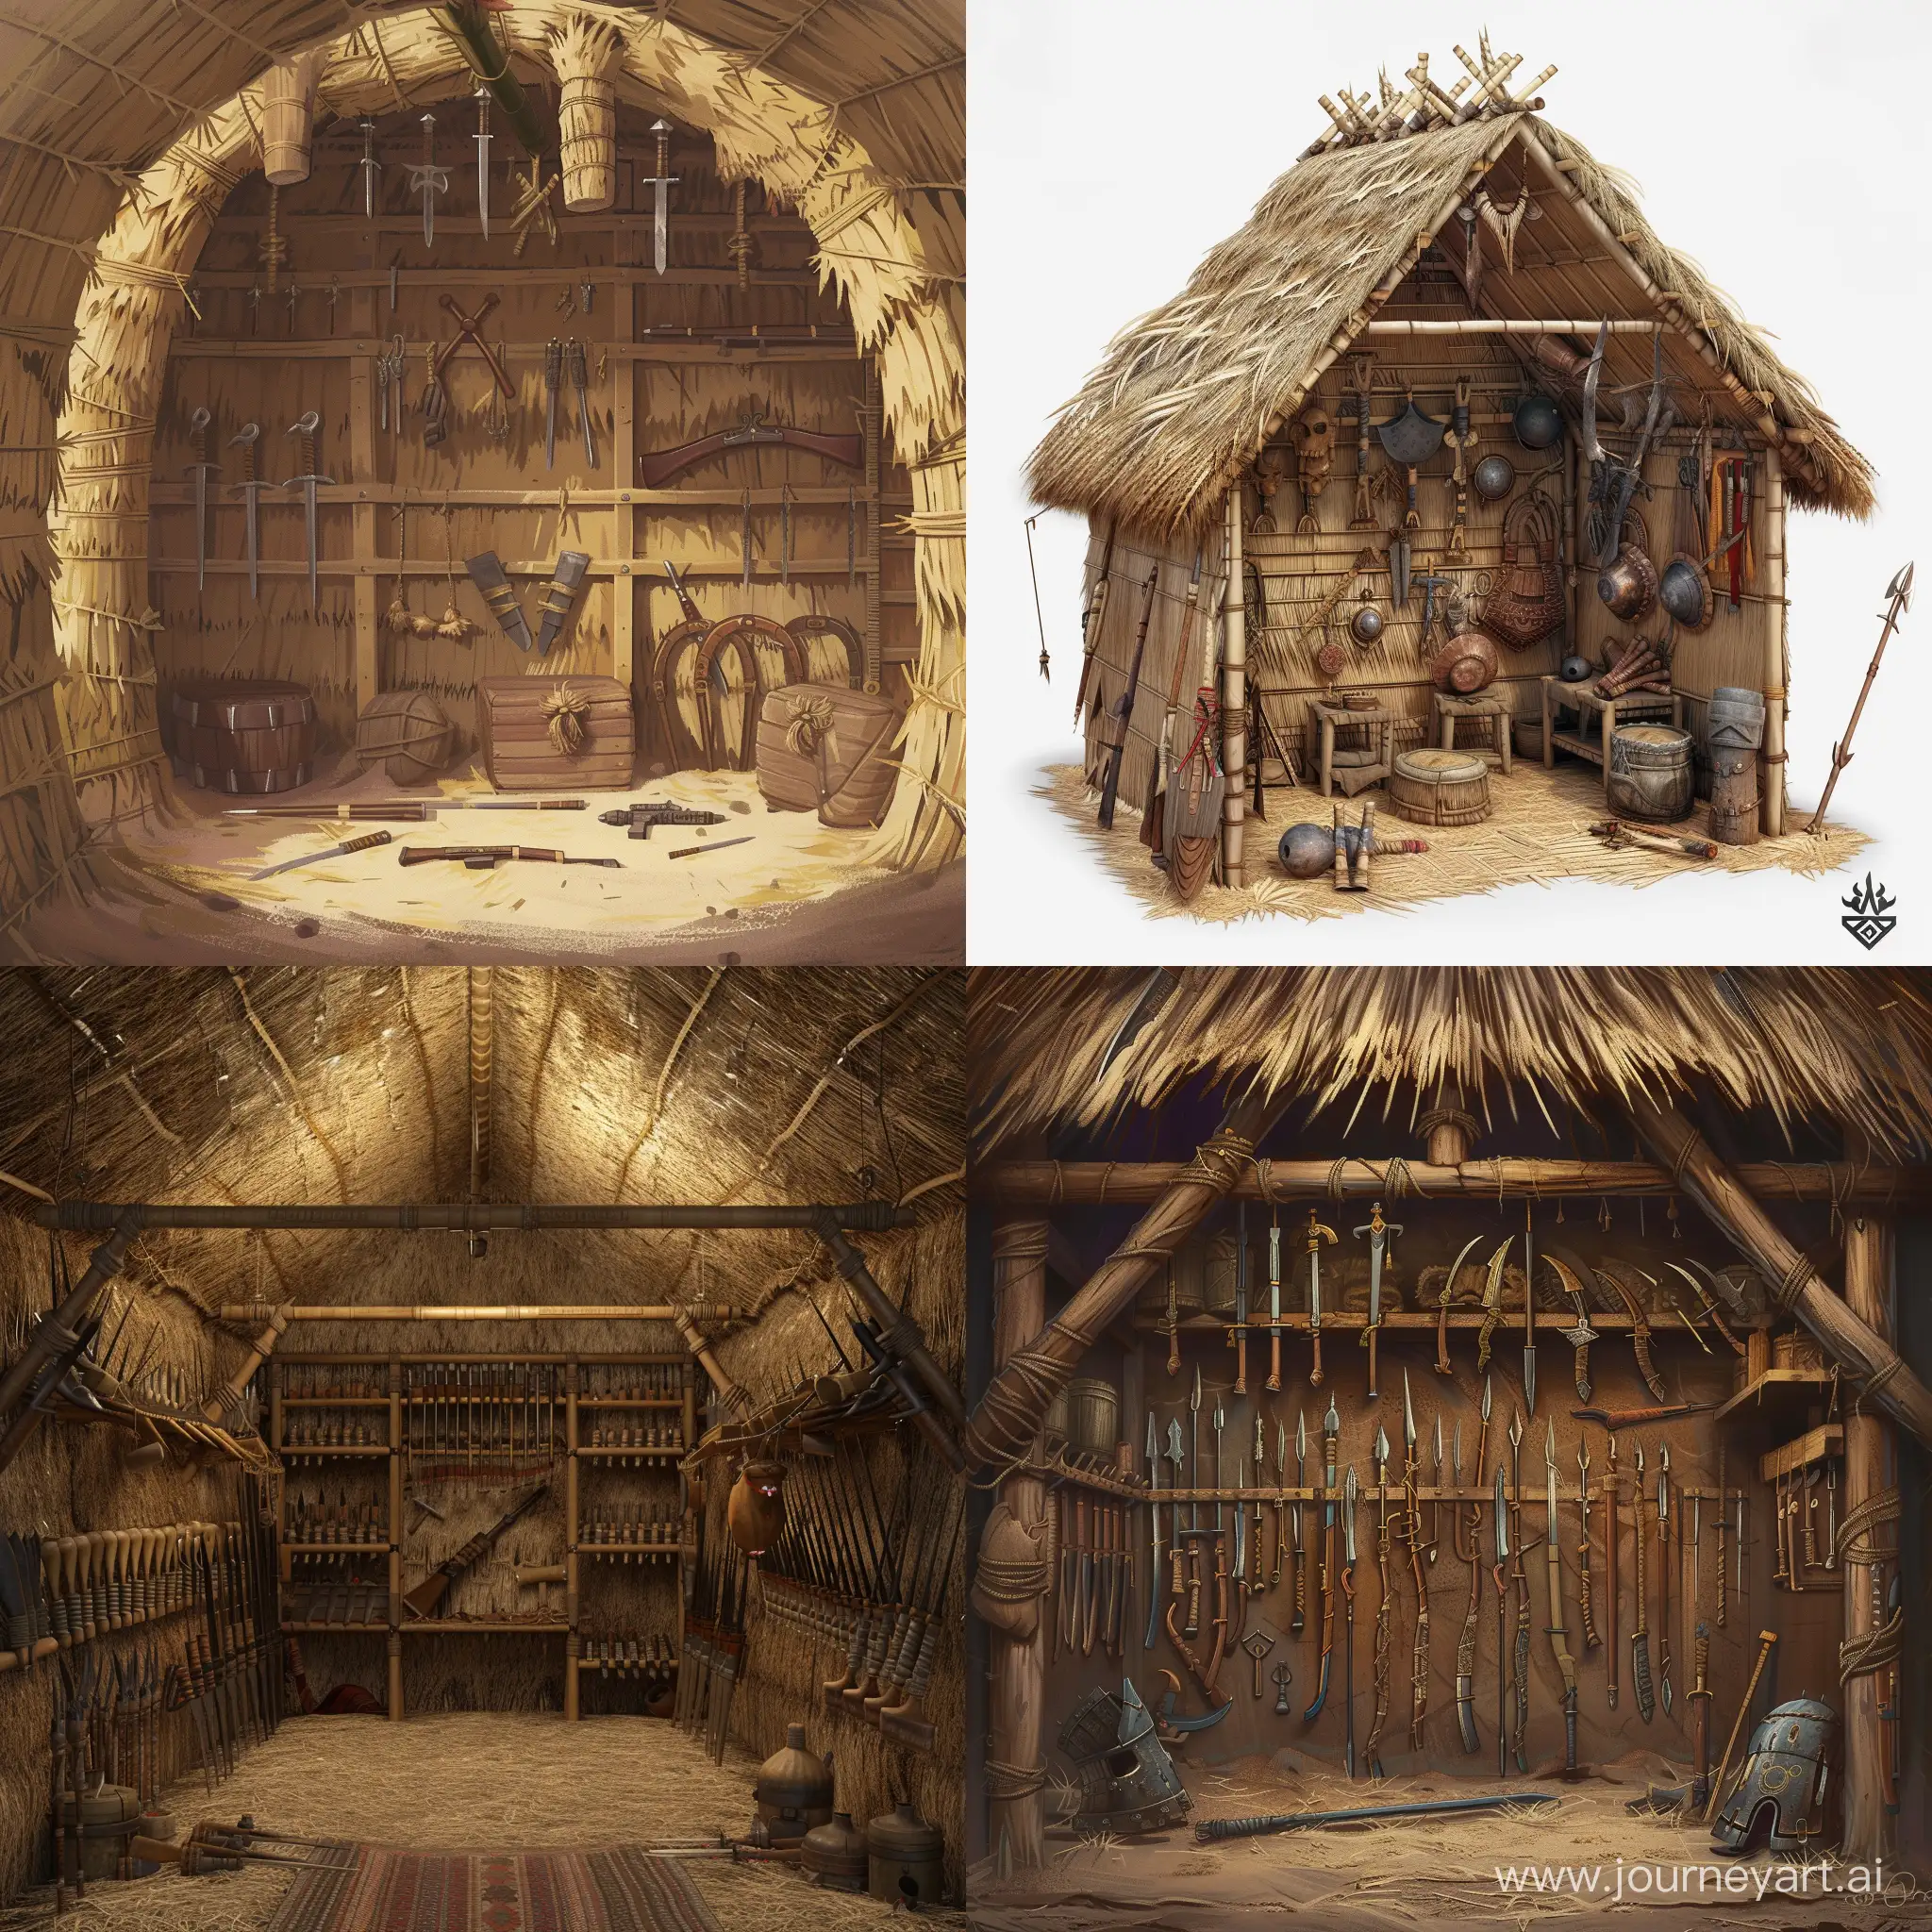 Primitive-Armory-Inside-a-Straw-Tribal-Hut-with-Crude-Weapons-and-Armor